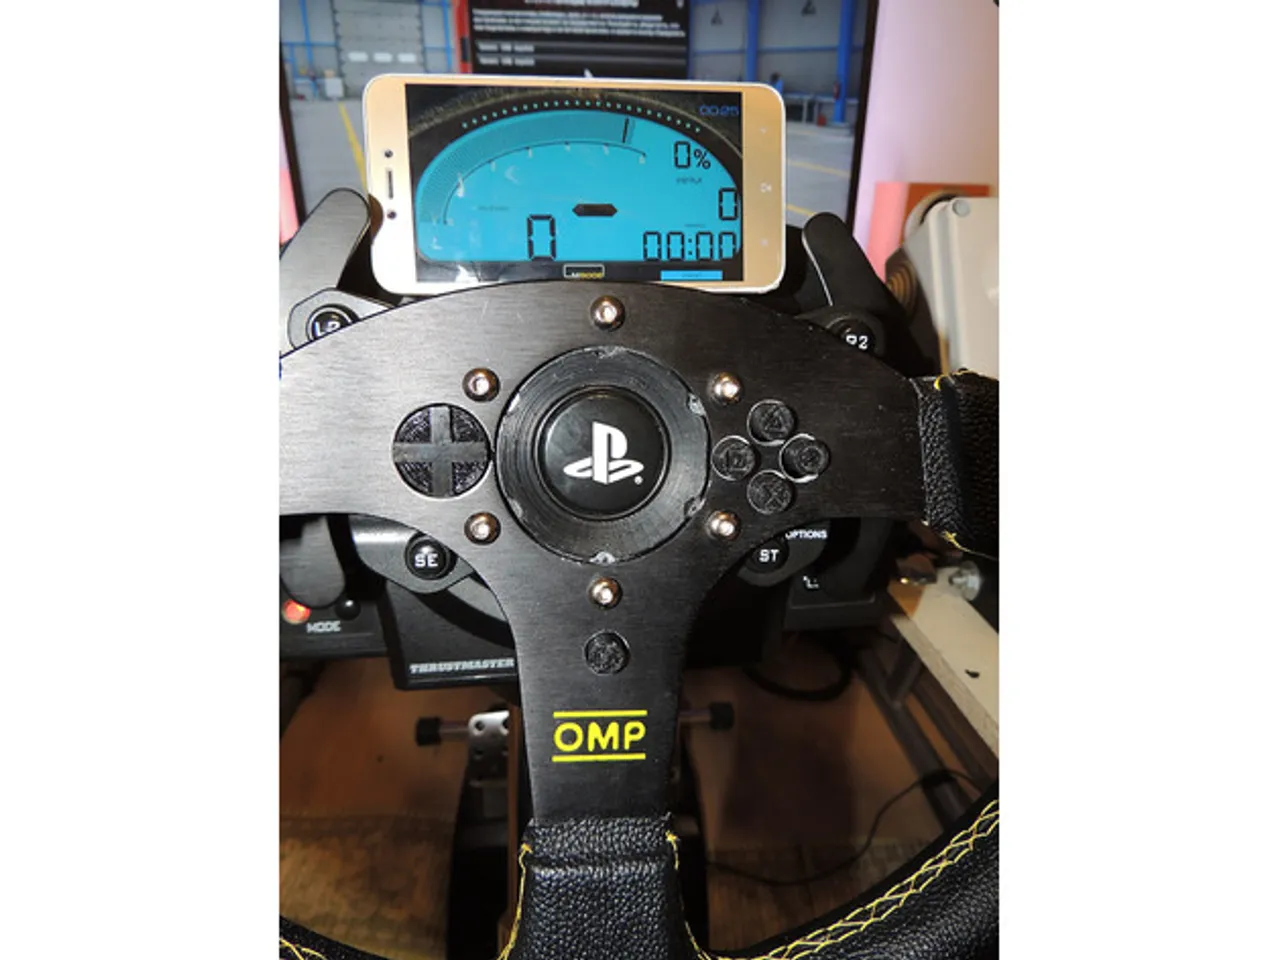 Thrustmaster T300 RS wheel elongated buttons by JozaFF